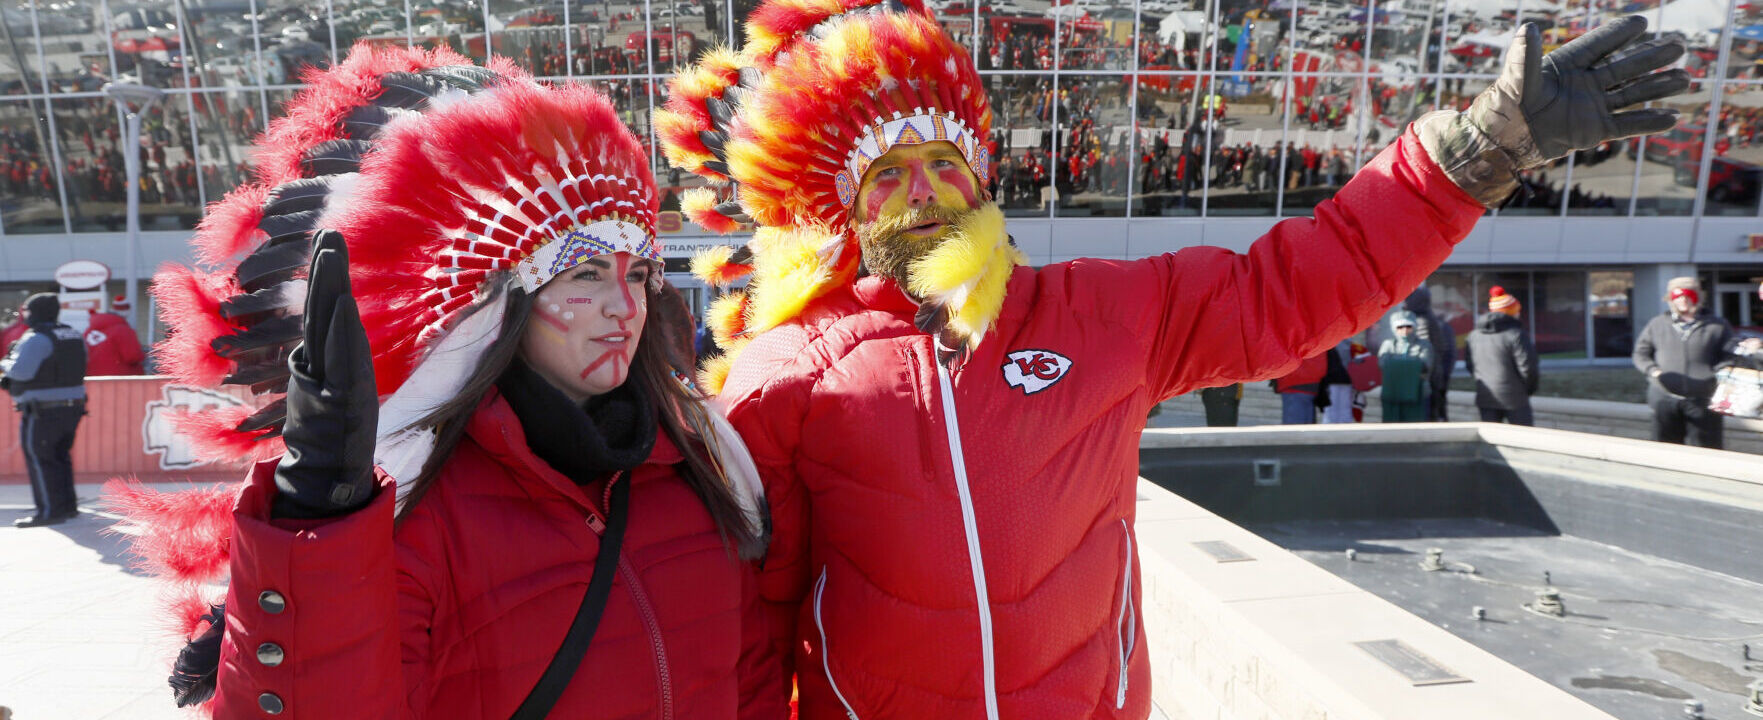 Should the Chiefs ban Native American headdresses and face paint?